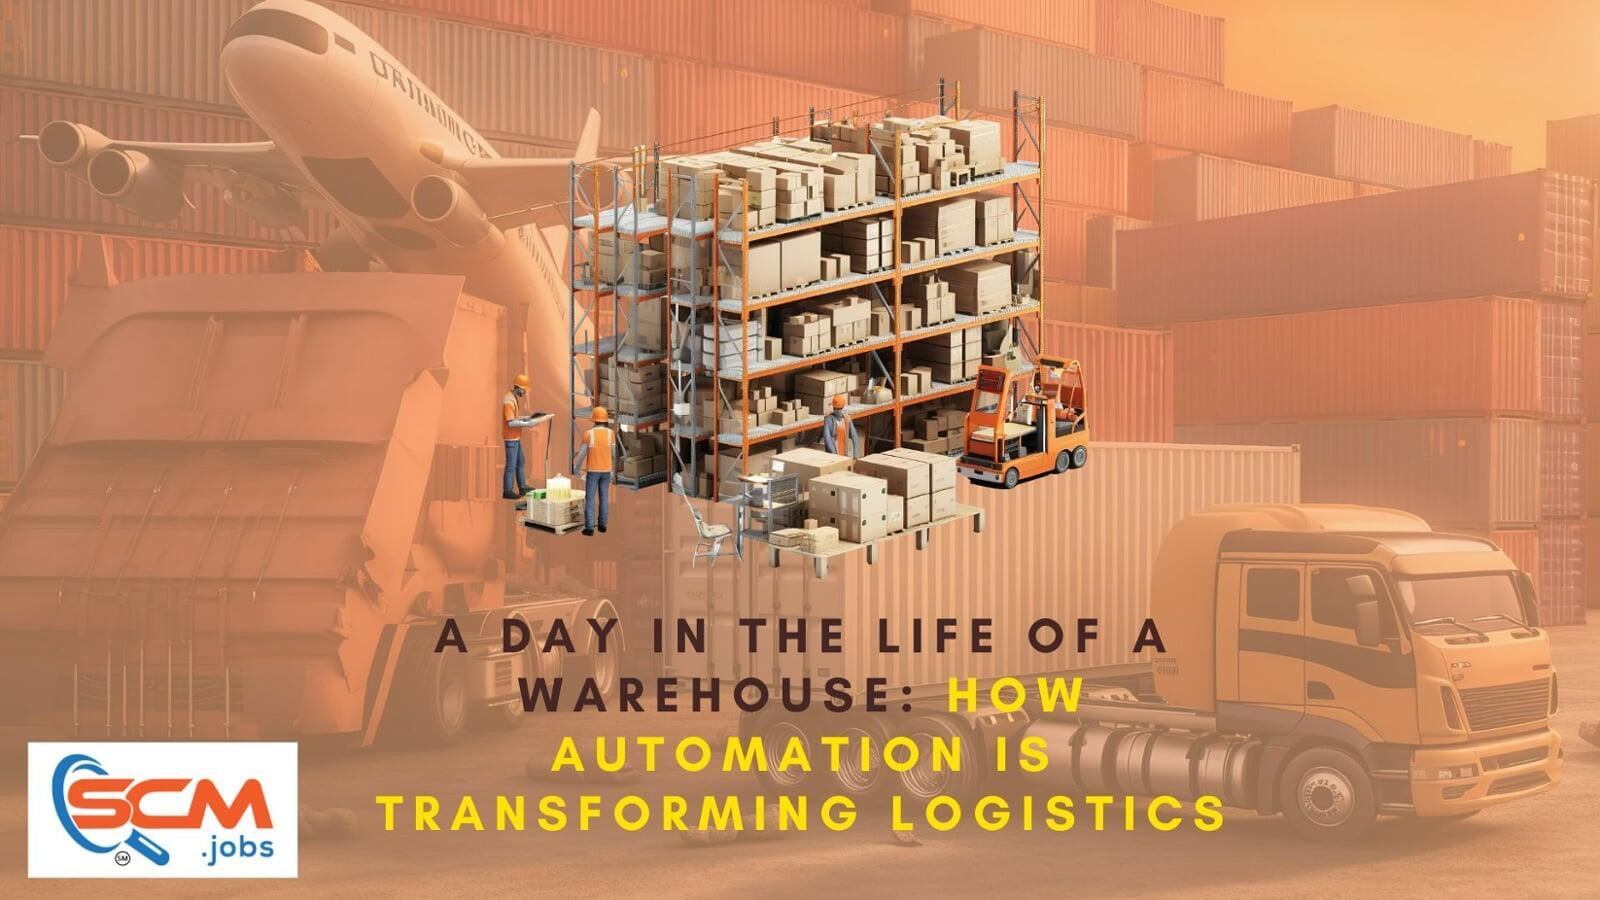 A Day in the Life of a Warehouse: How Automation is Transforming Logistics